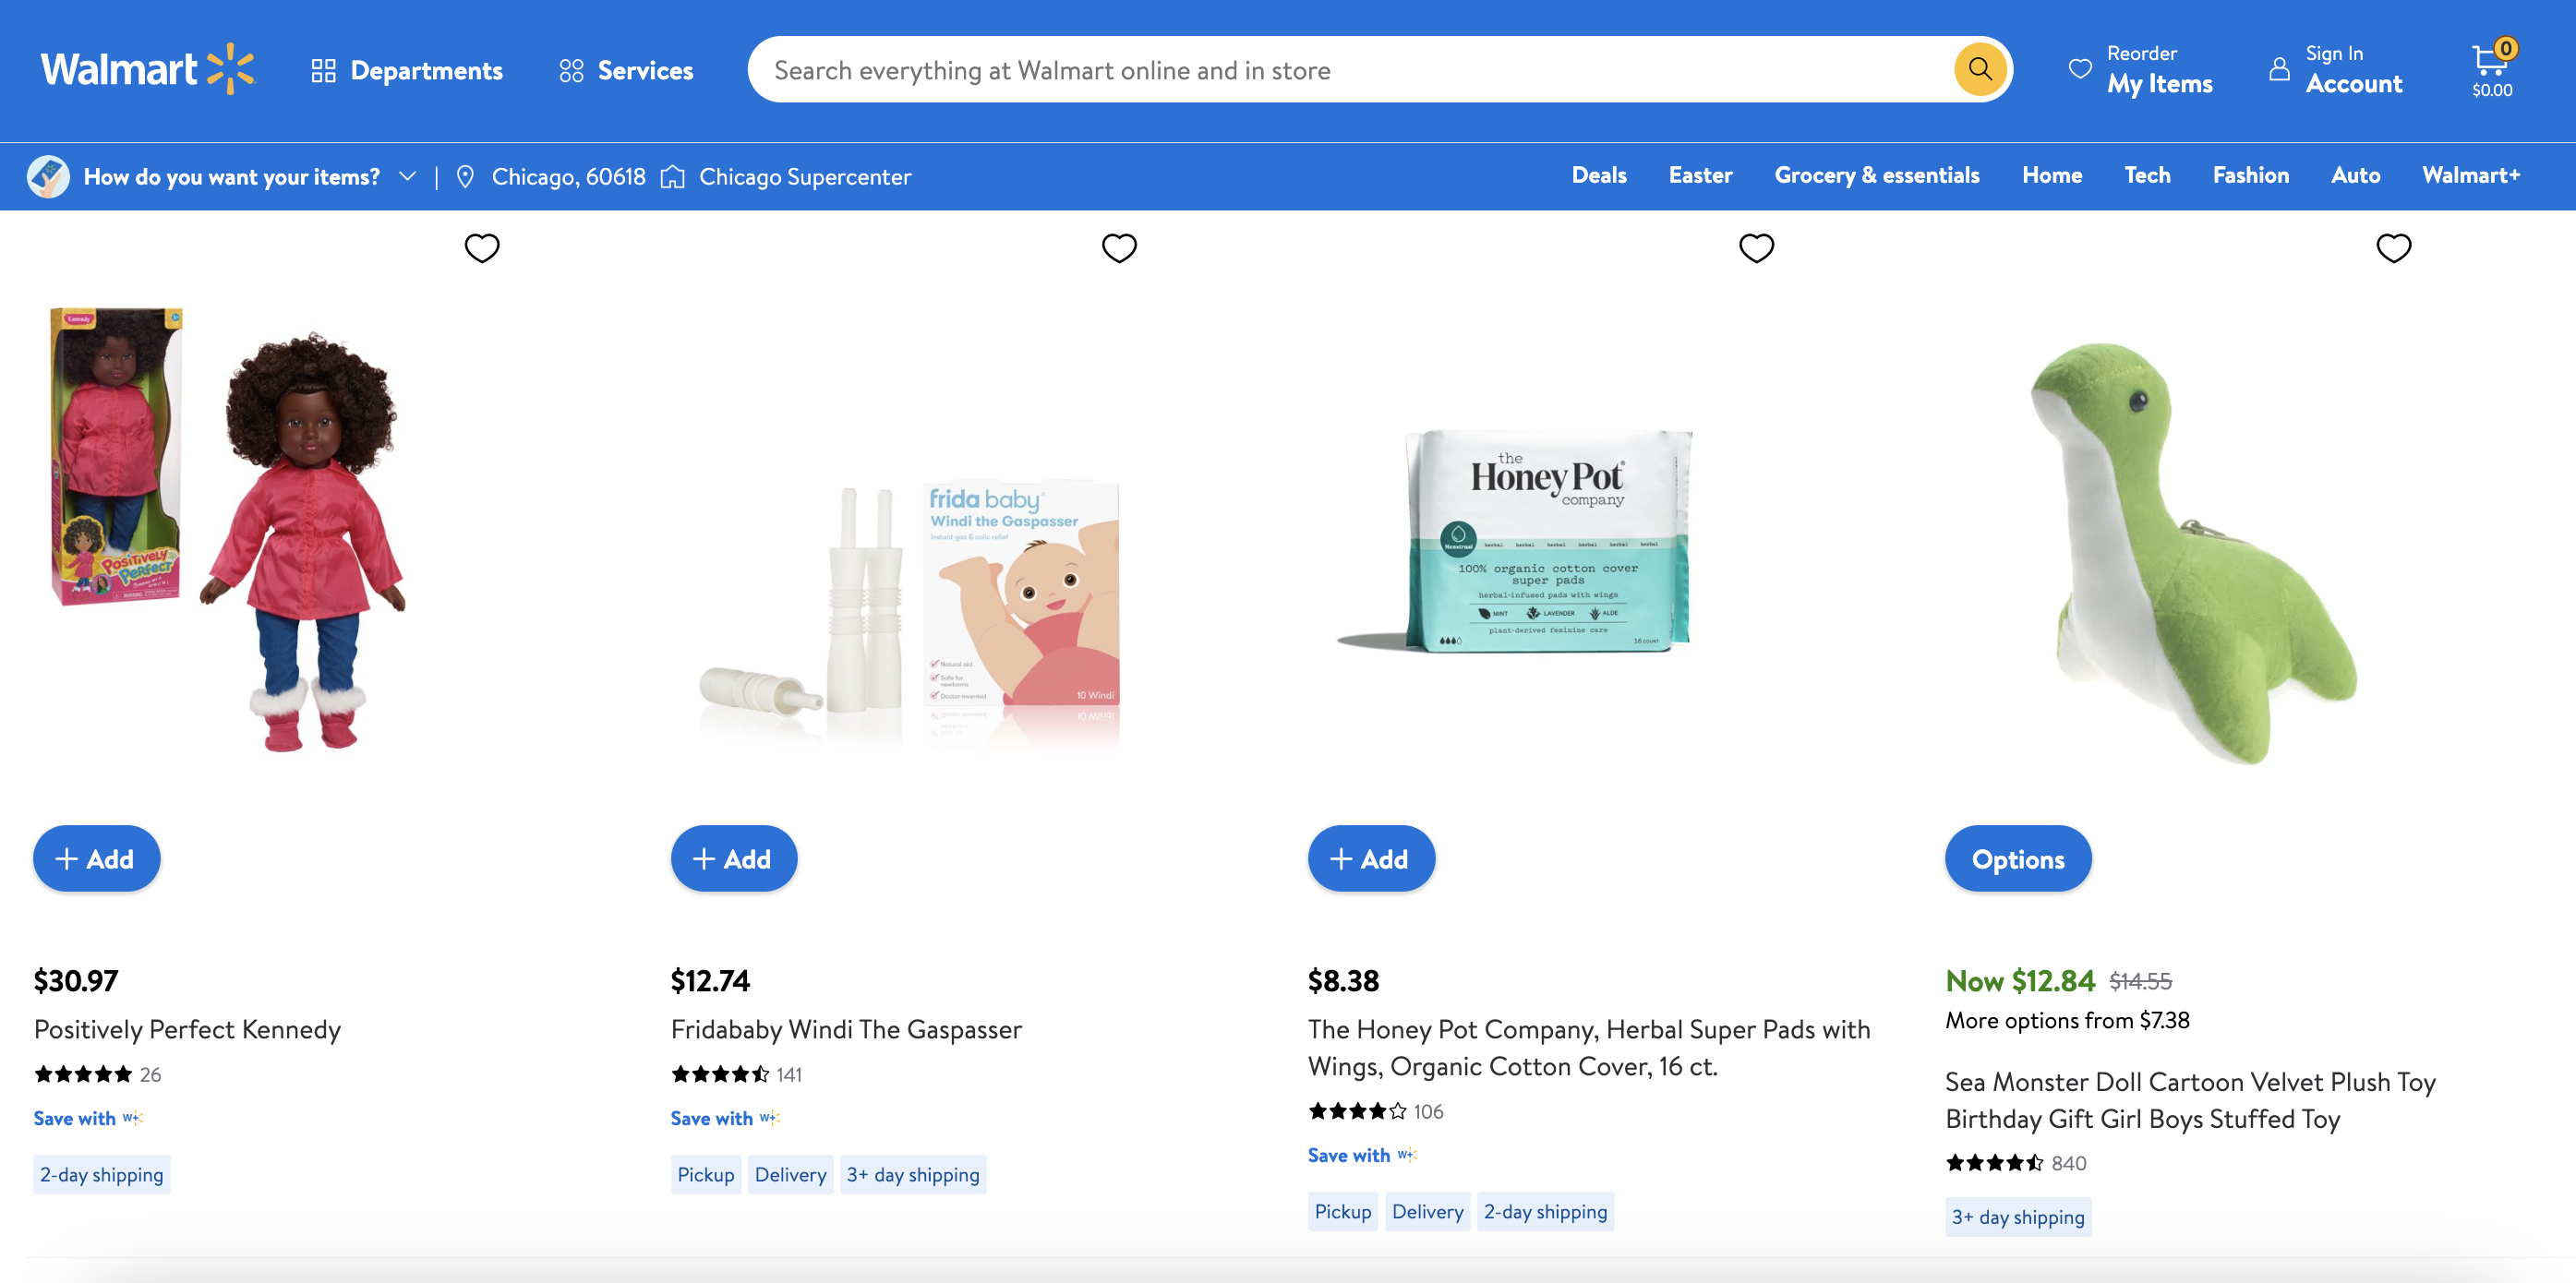 Walmart.com search results page for women-owned brands.